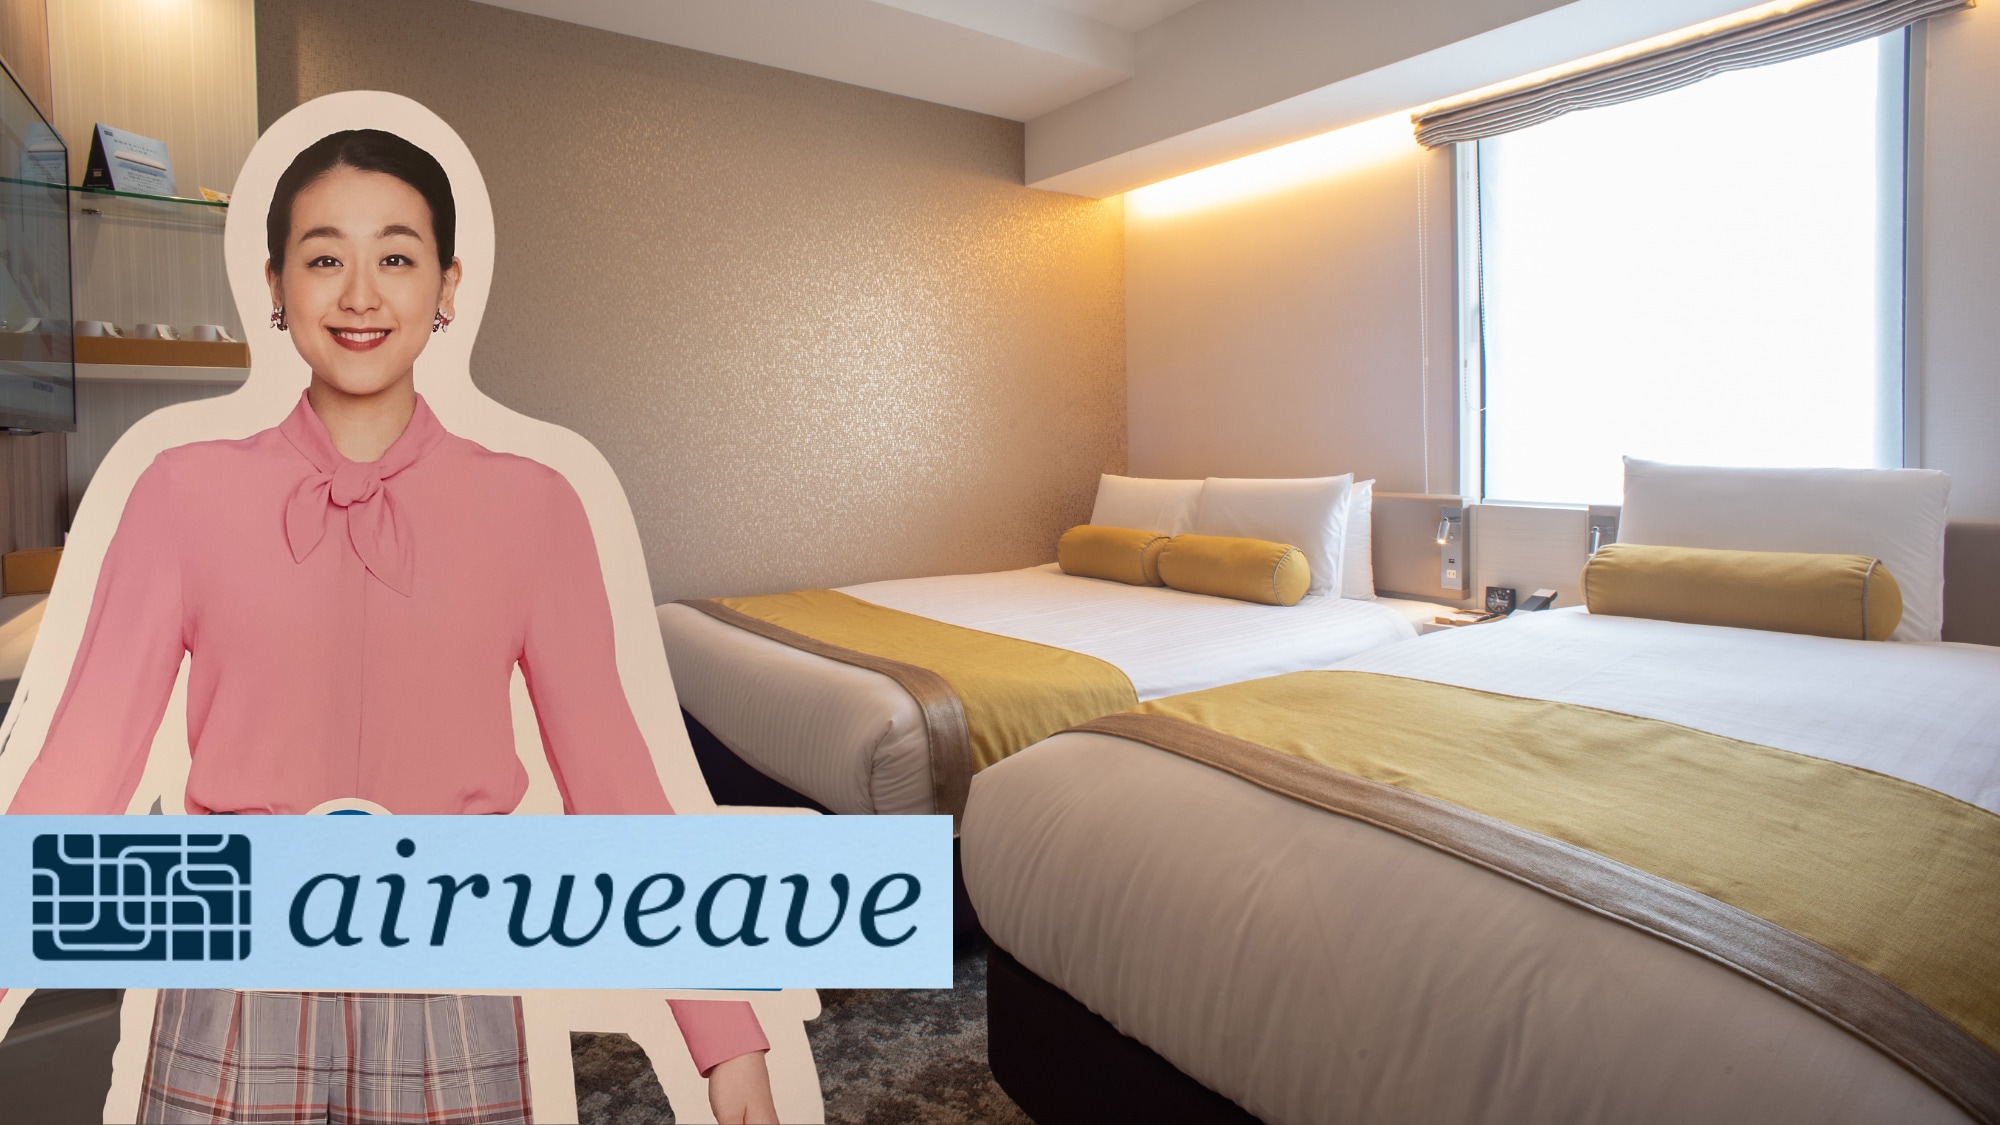 Superior Twin <All rooms are equipped with Airweave>